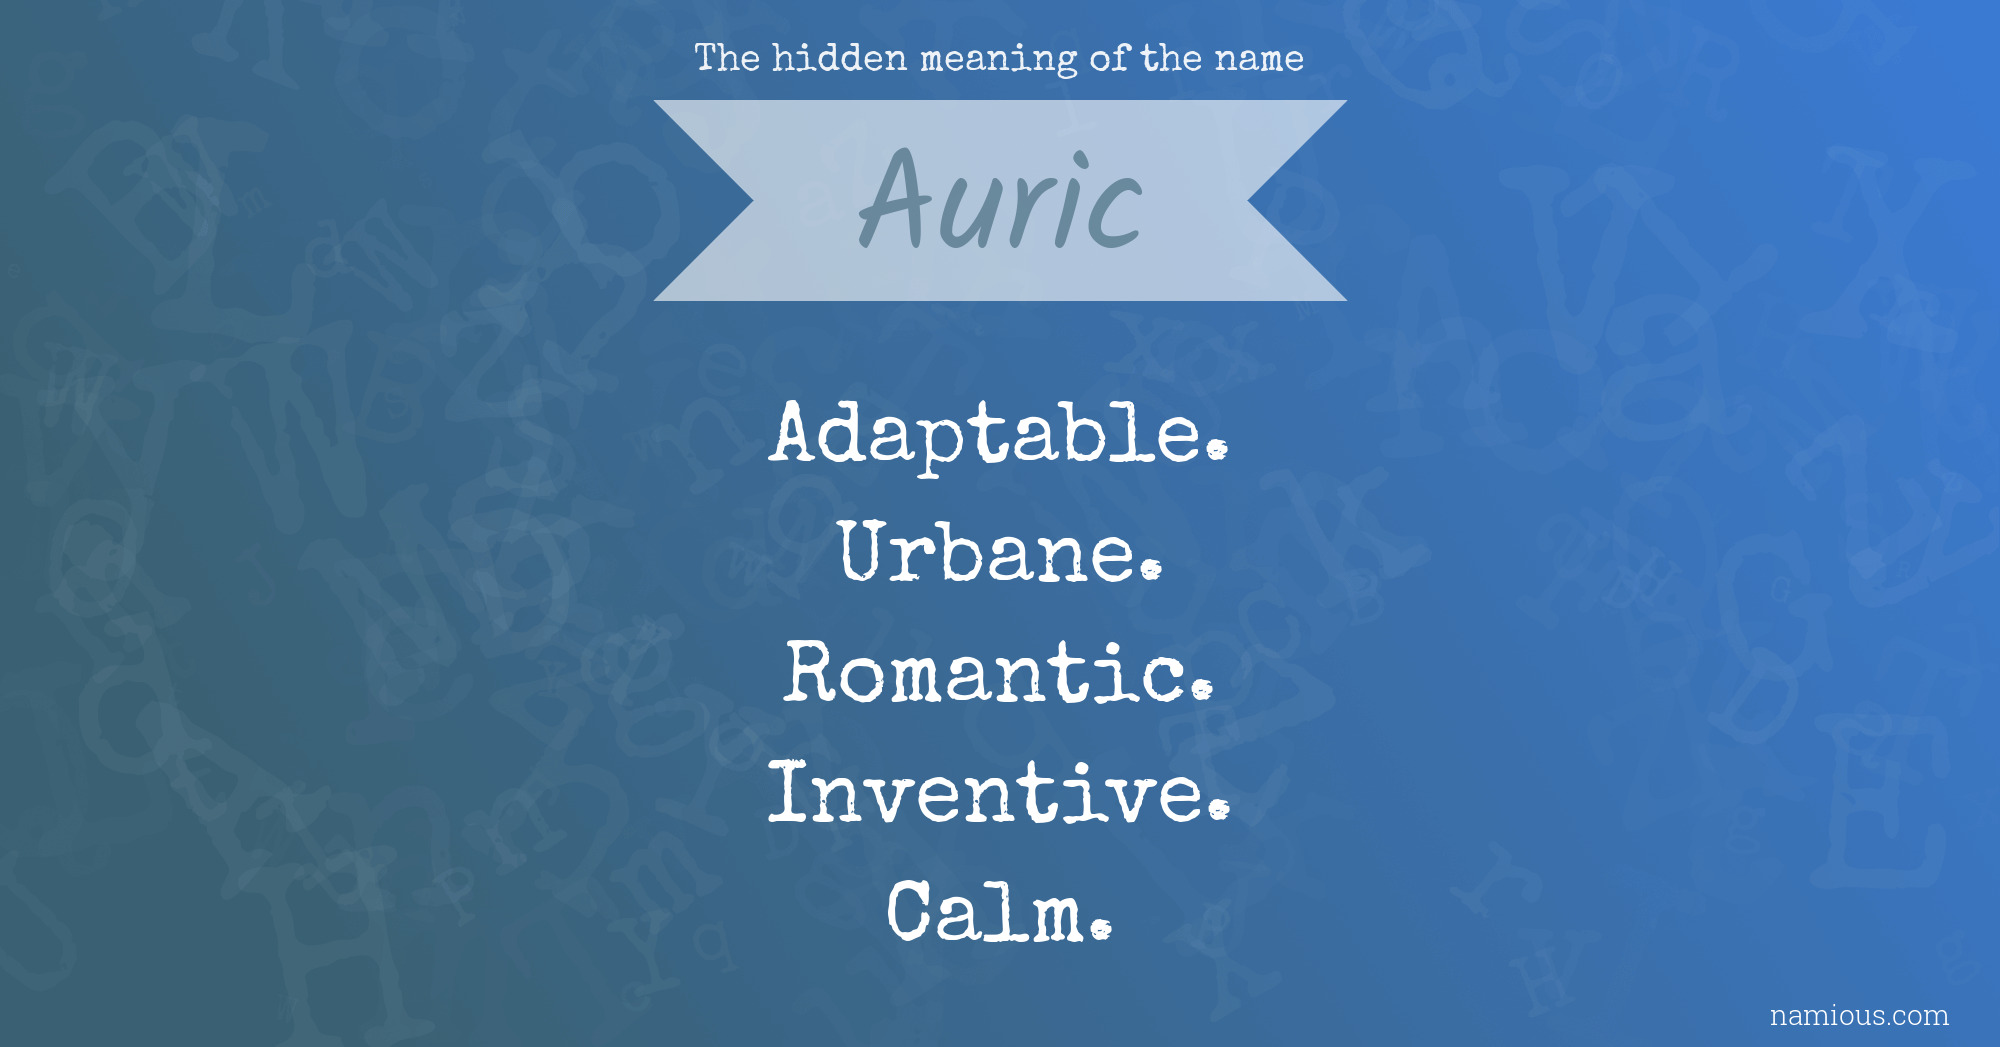 The hidden meaning of the name Auric